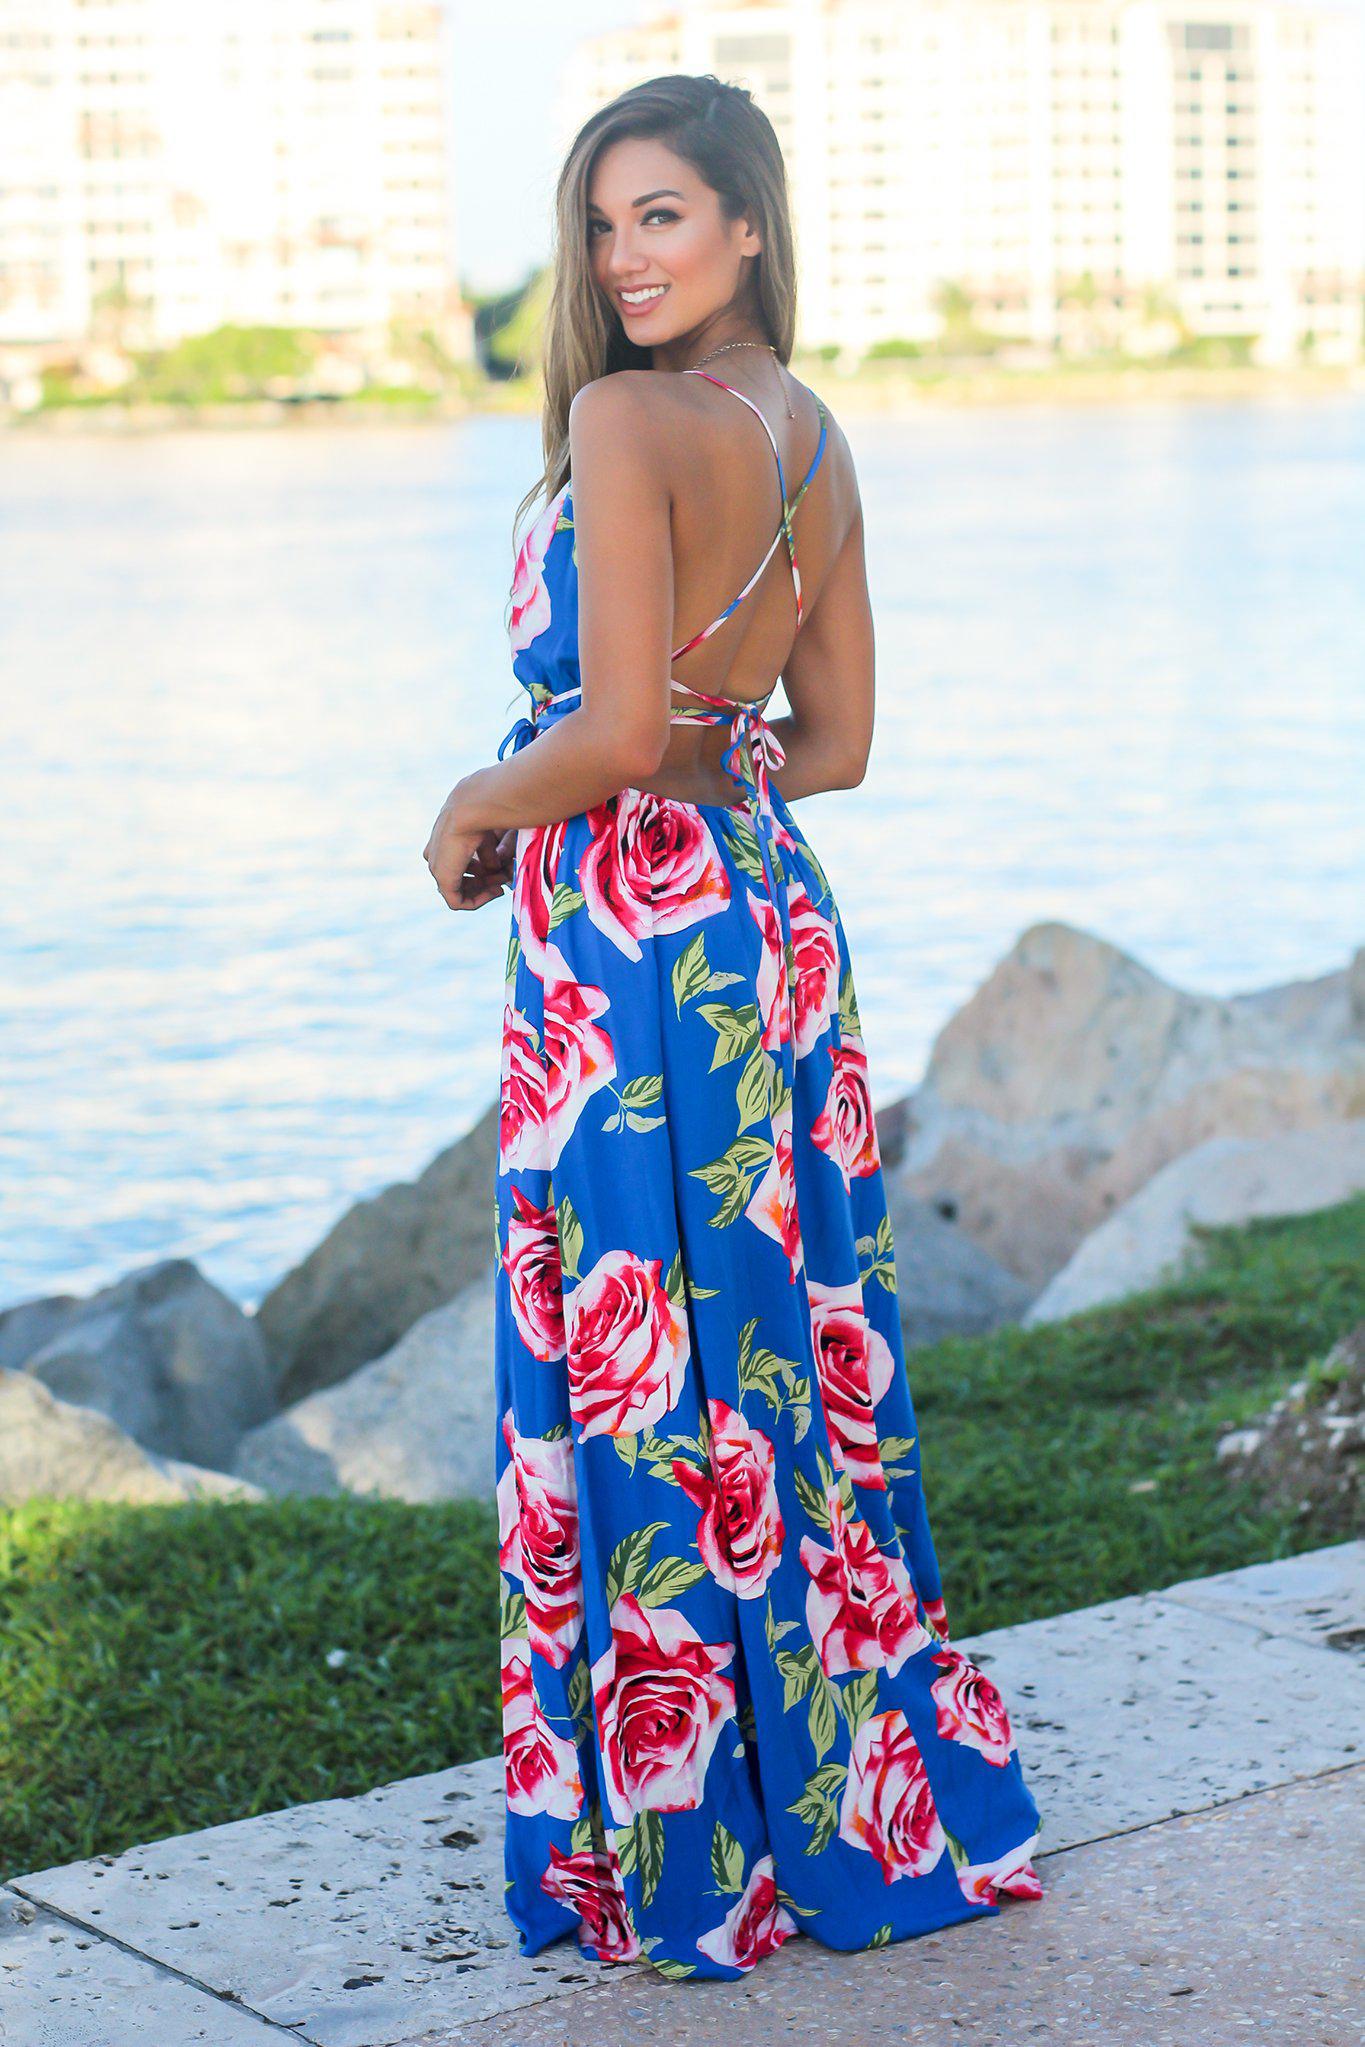 Royal Blue Maxi Dress with Rose Print | Cute Dresses – Saved by the Dress